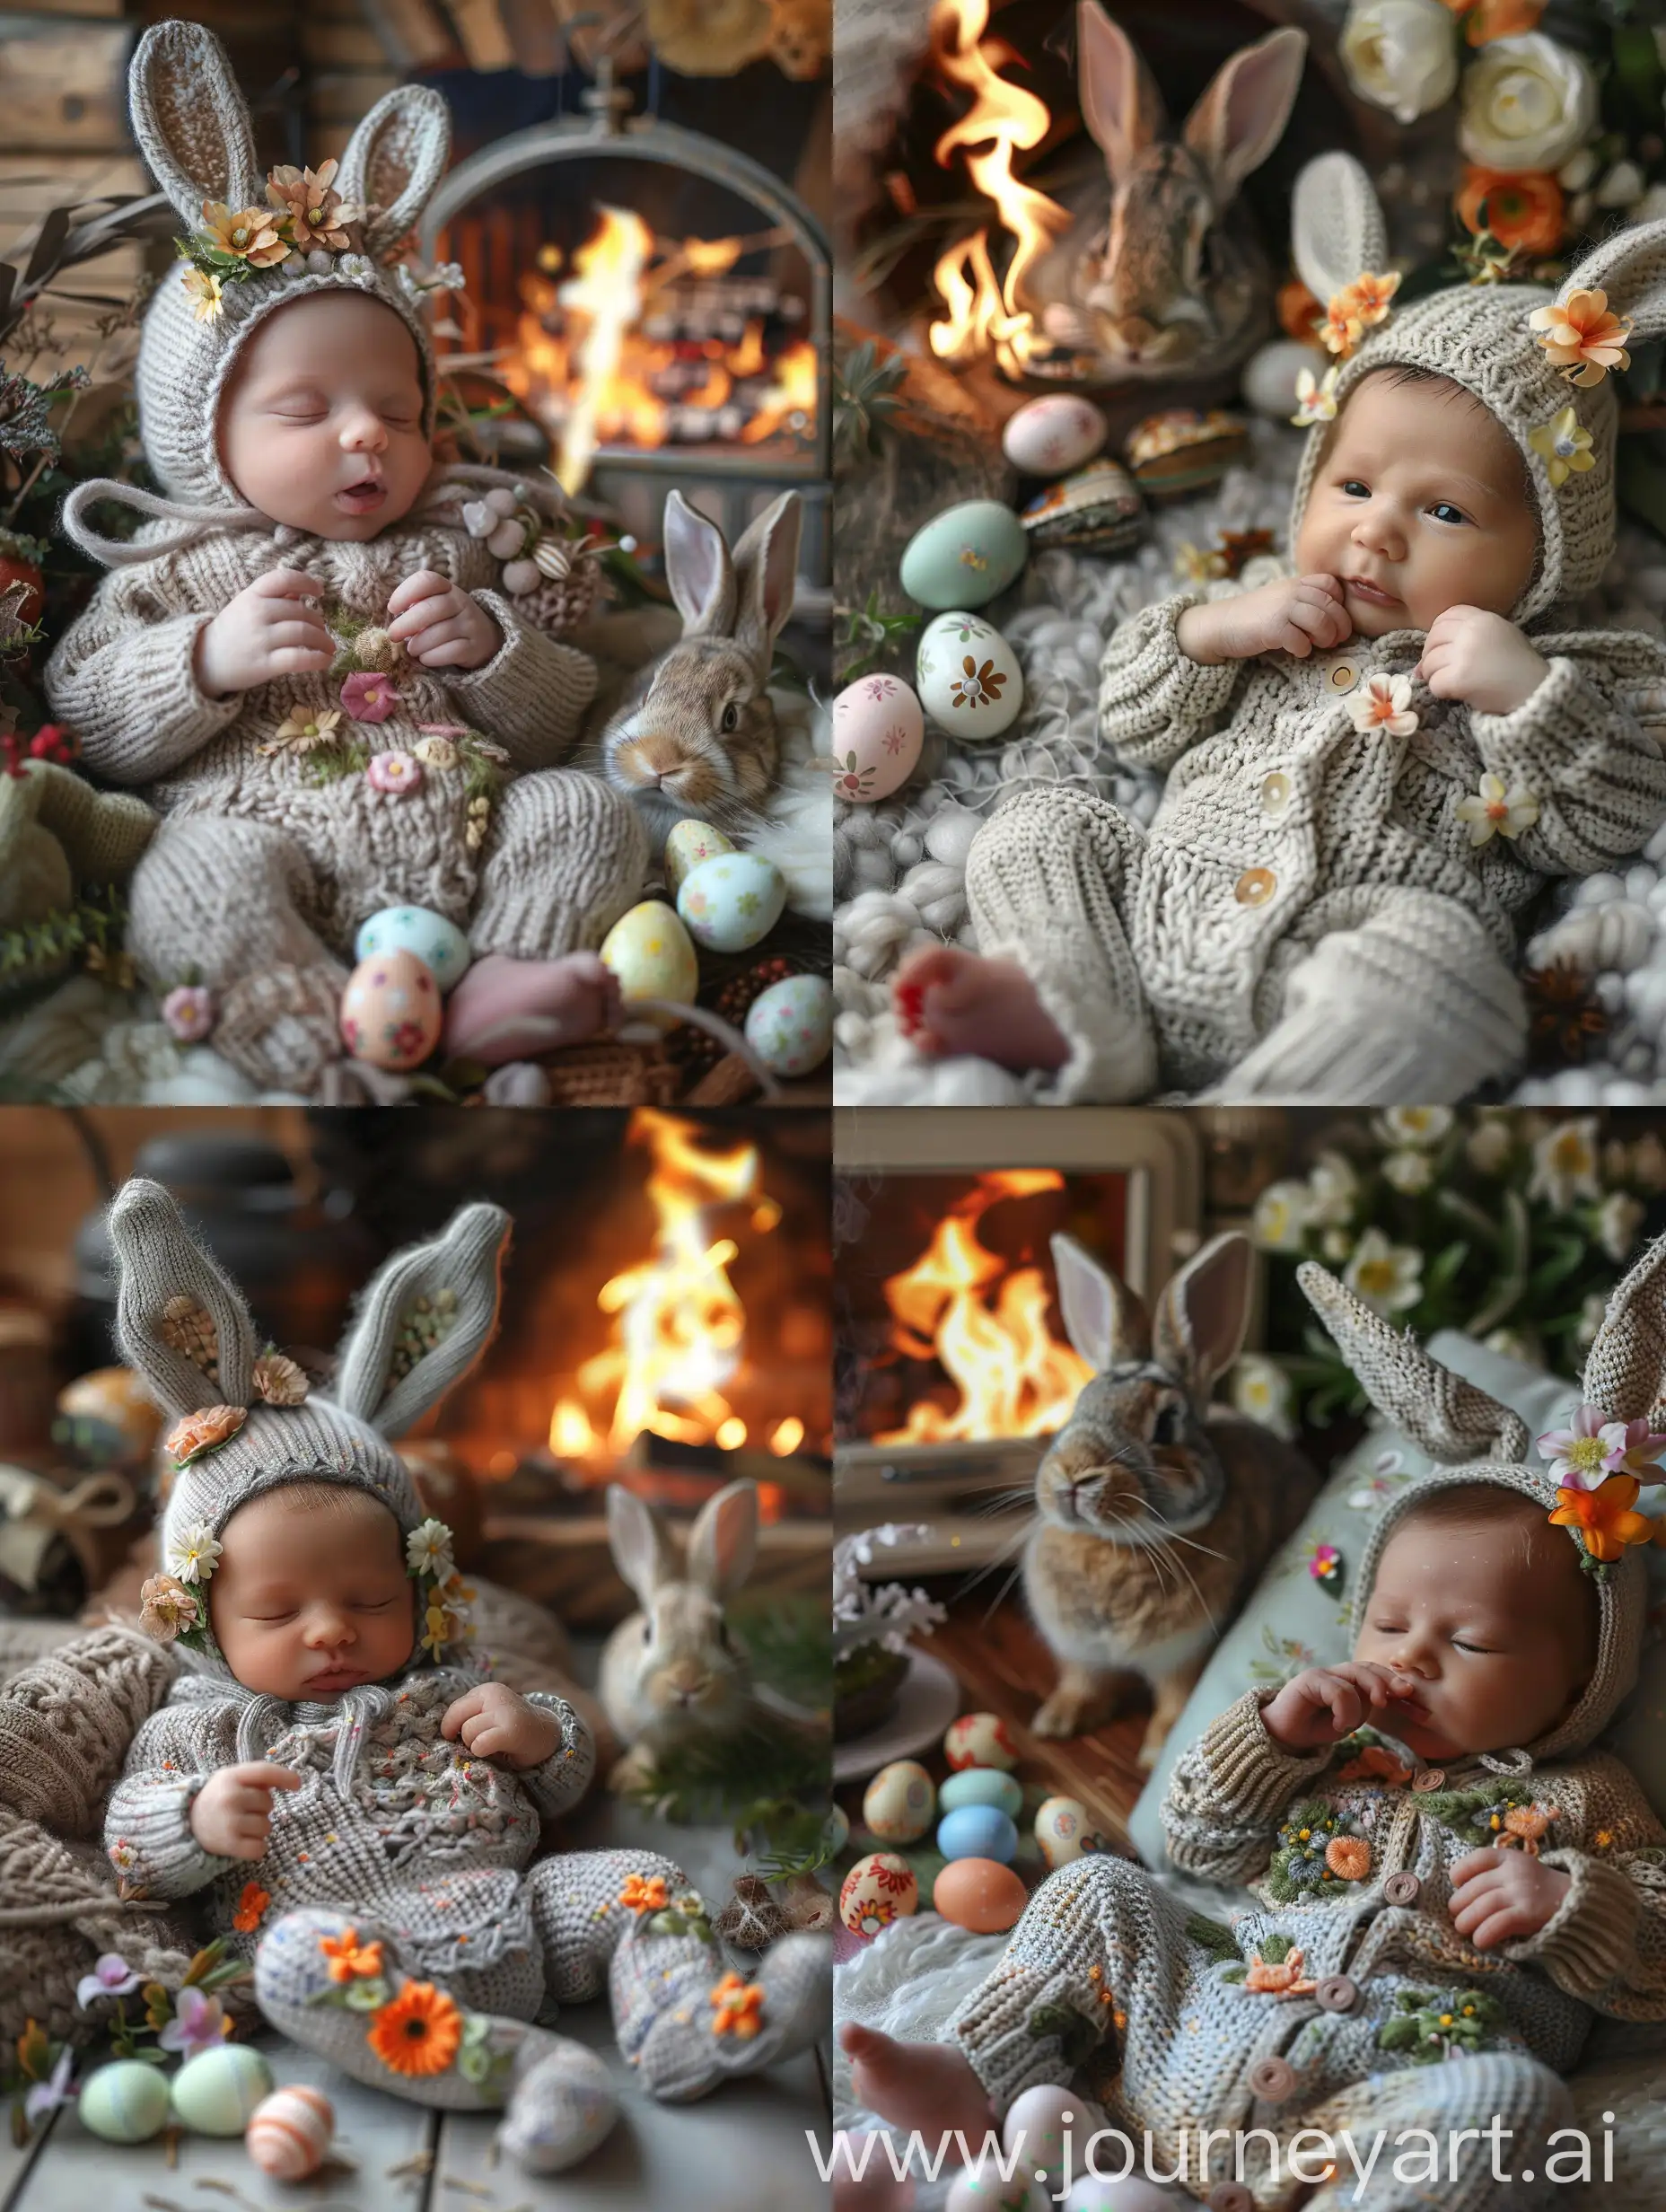 Baby, baby is lying in a knitted suit with bunny ears and flowers, fiddling, Easter eggs are lying next to him, and a live rabbit is burning in the background, realistic photo, hyperrealism, a face looking into the camera is clearly visible, a close-up face, a photo angle from above